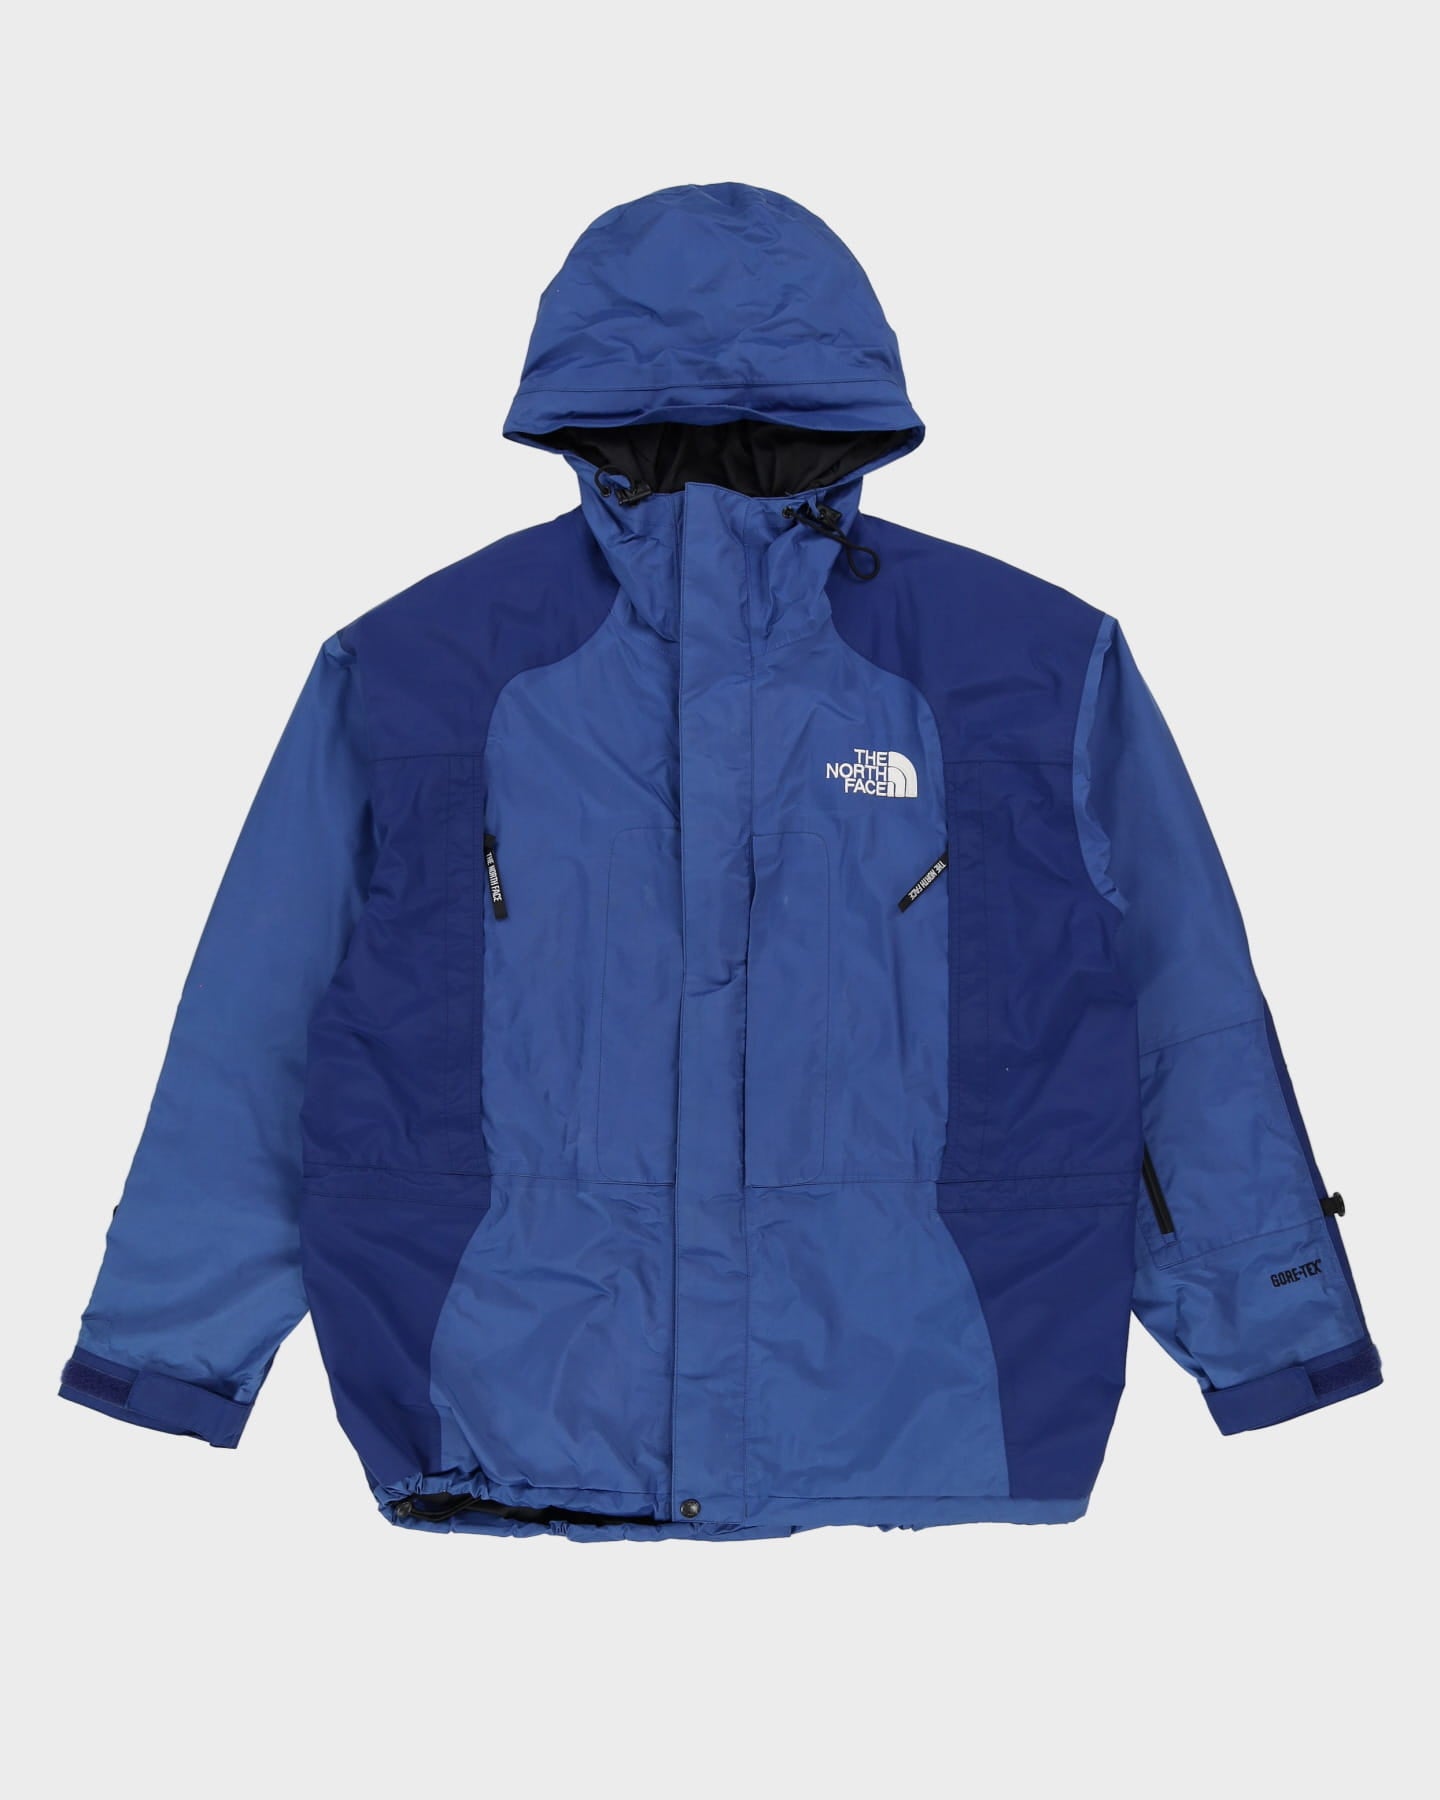 Vintage 90s The North Face Blue Gore-Tex Hooded Jacket - XL